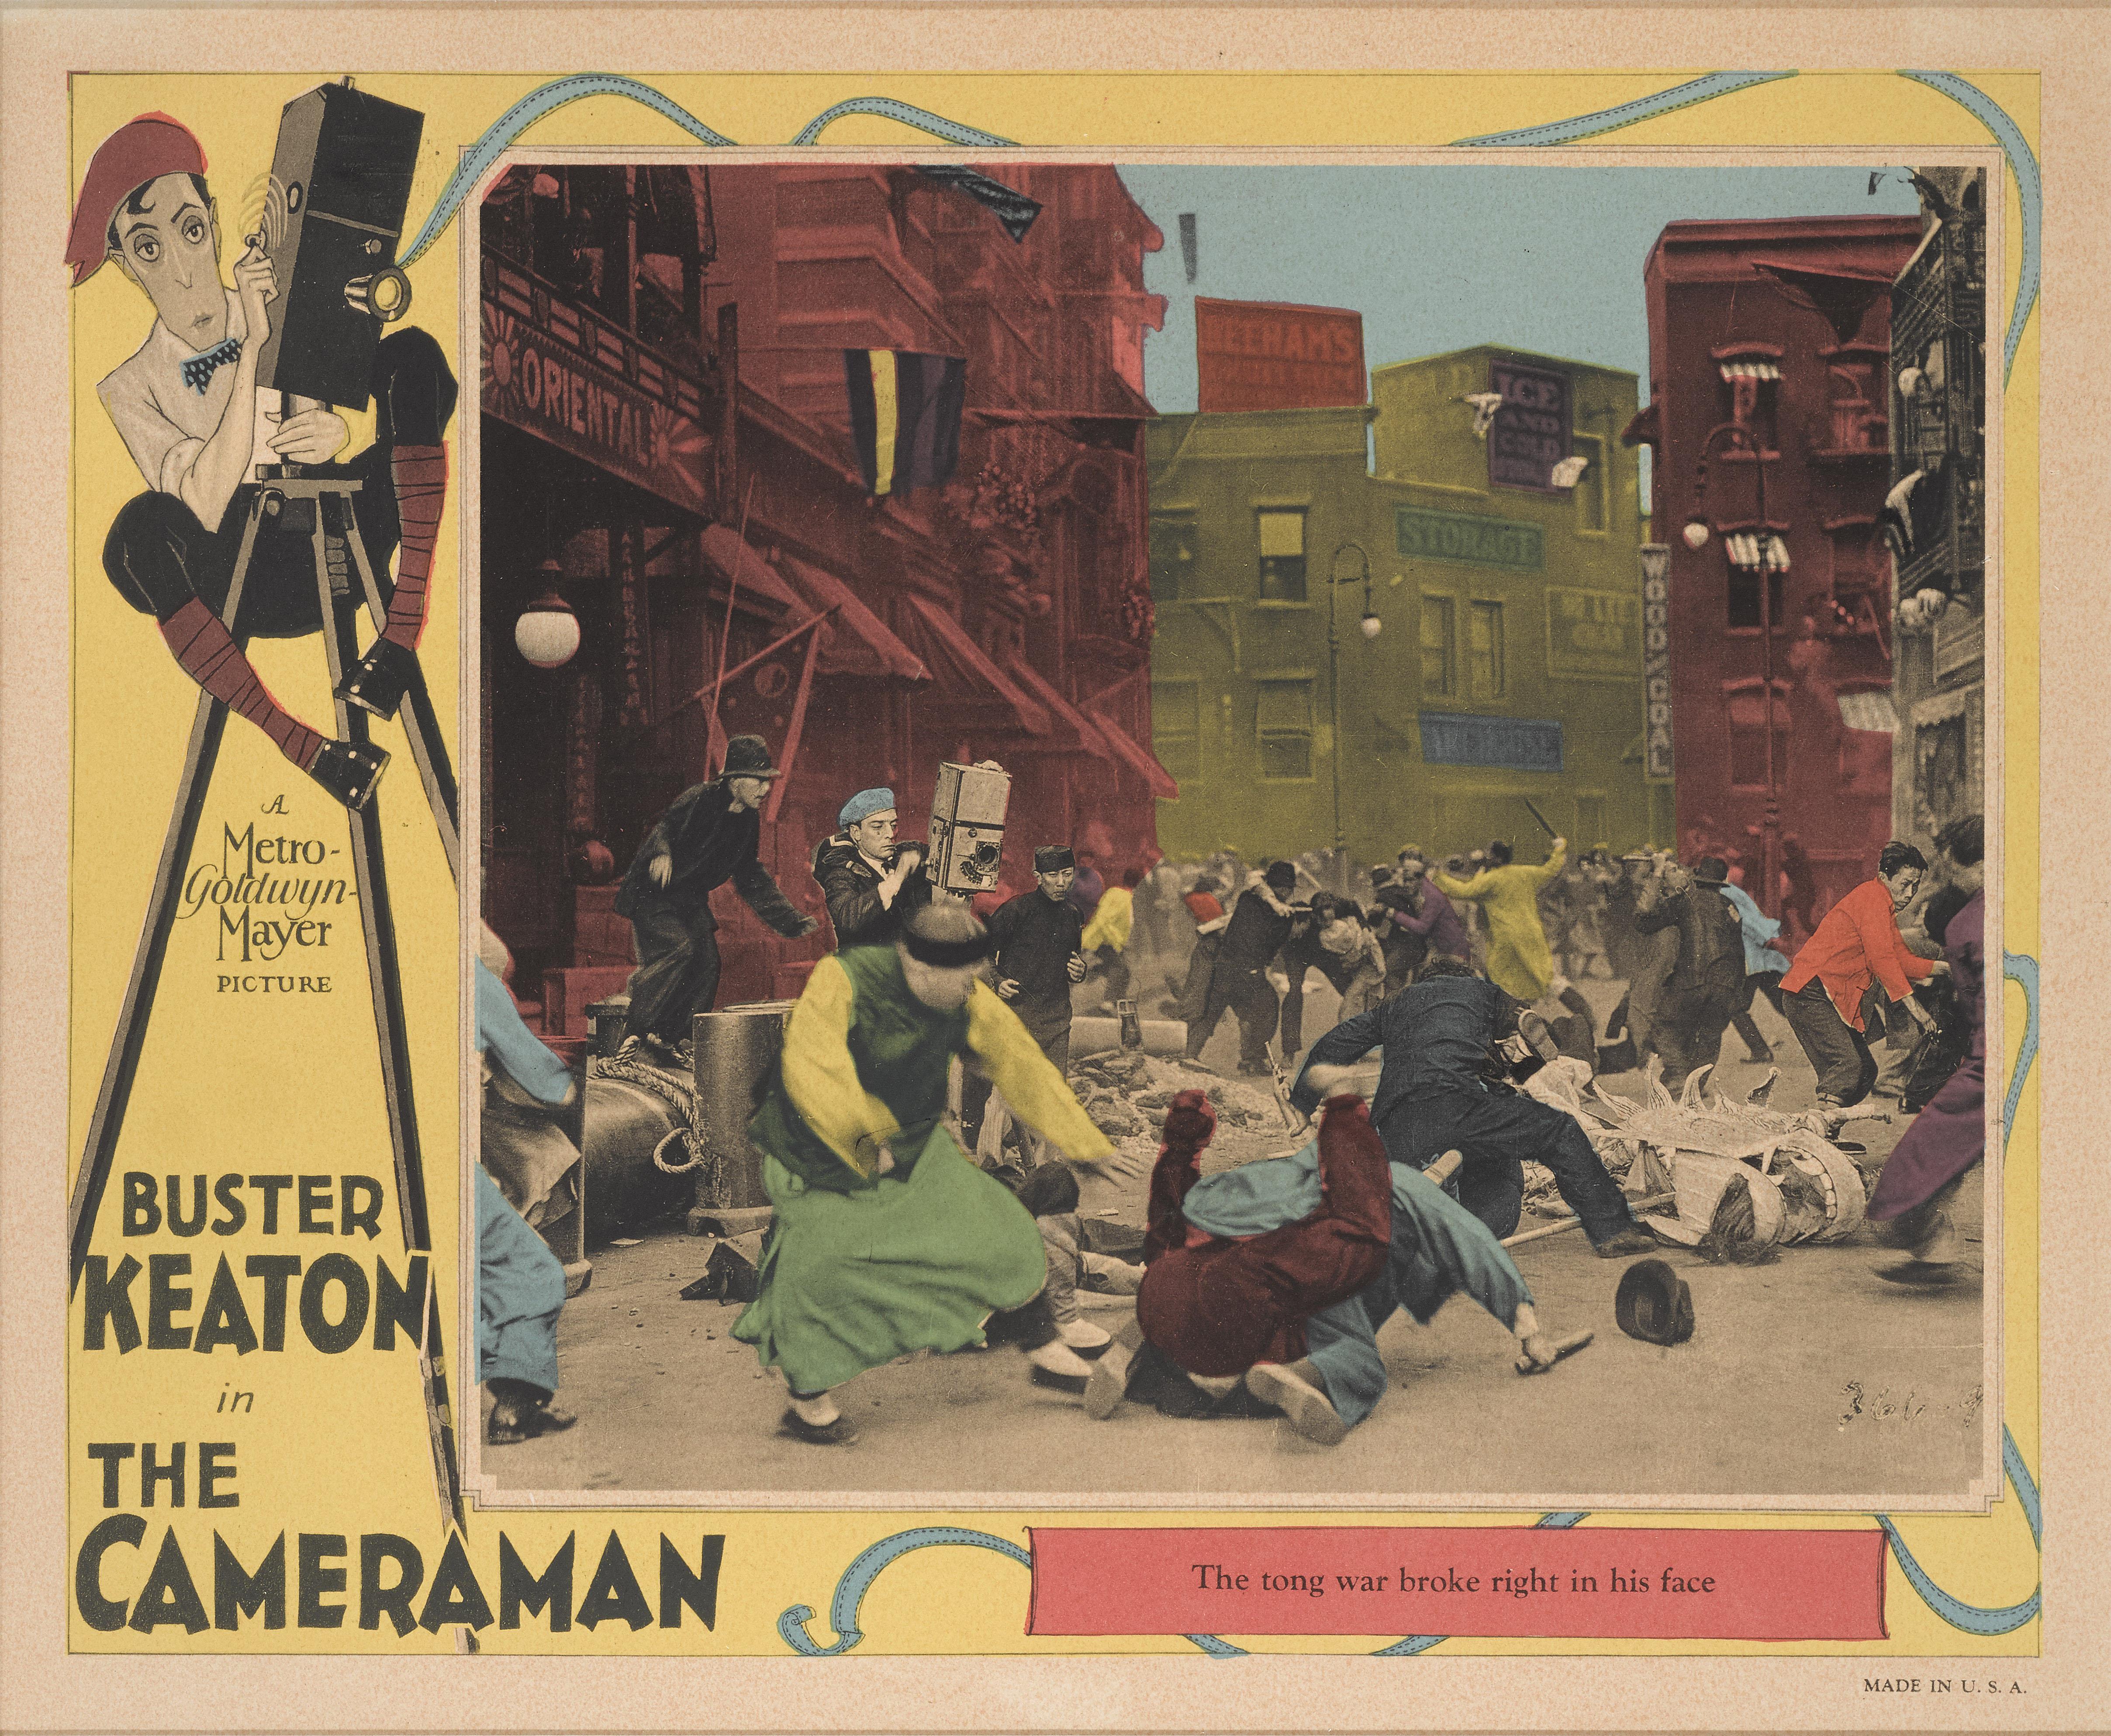 Original US lobby card for The Cameraman, 1928.
This silent comedy was directed by Edward Sedgwick and an uncredited Buster Keaton. The film stars Keaton, Marceline Day and Harold Goodwin. It was Keaton's first film with Metro-Goldwyn-Mayer.
This